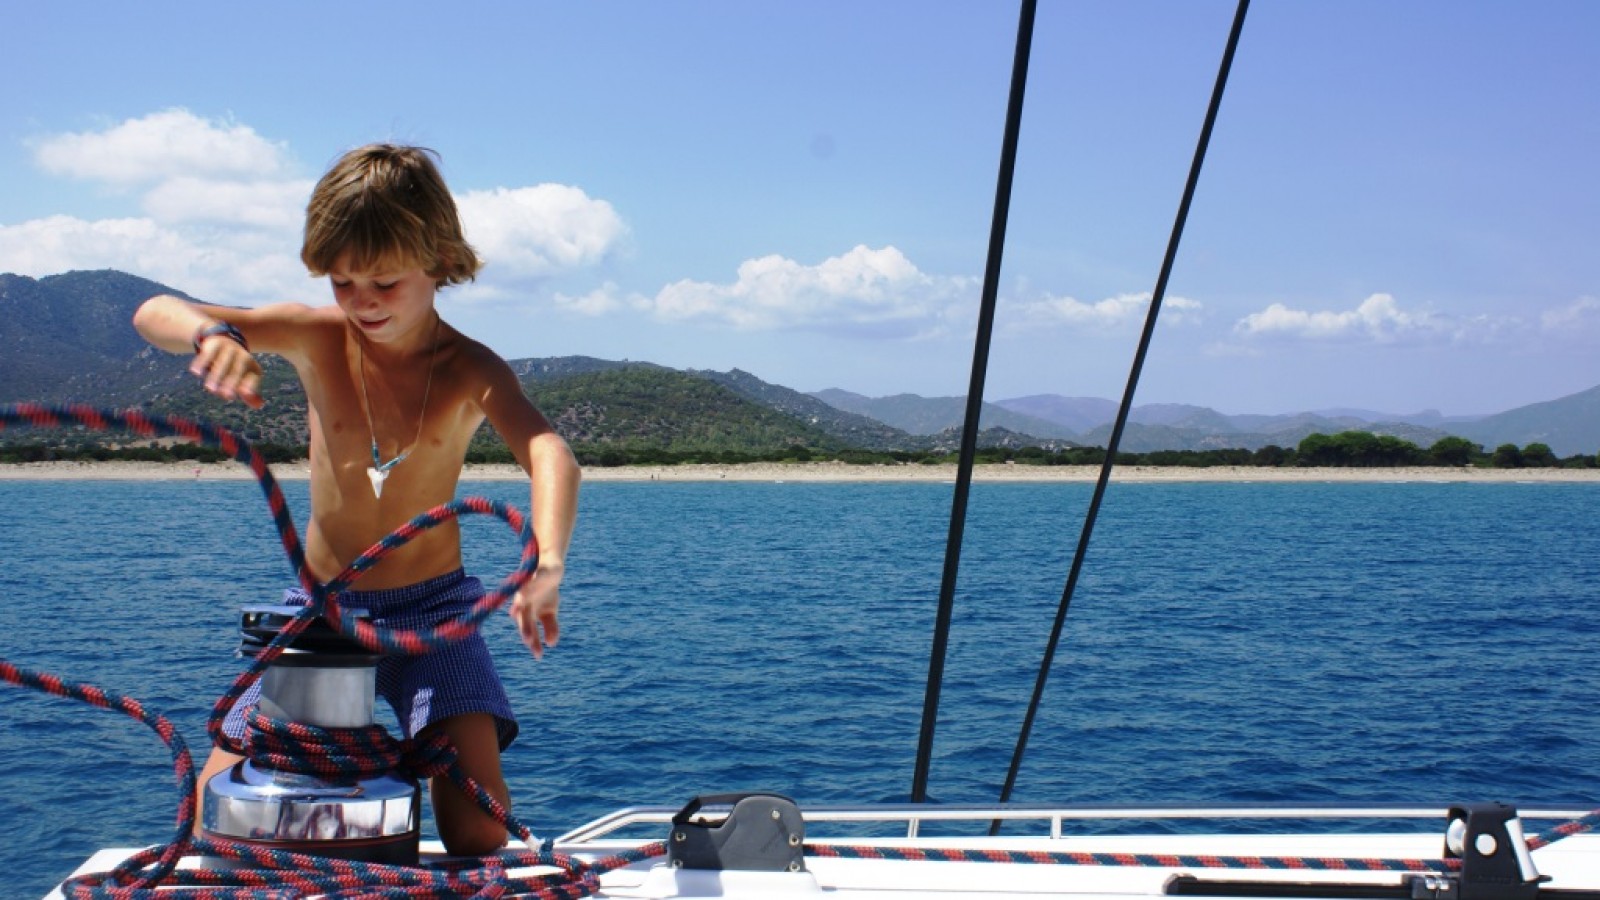 Kids & Family for sailing